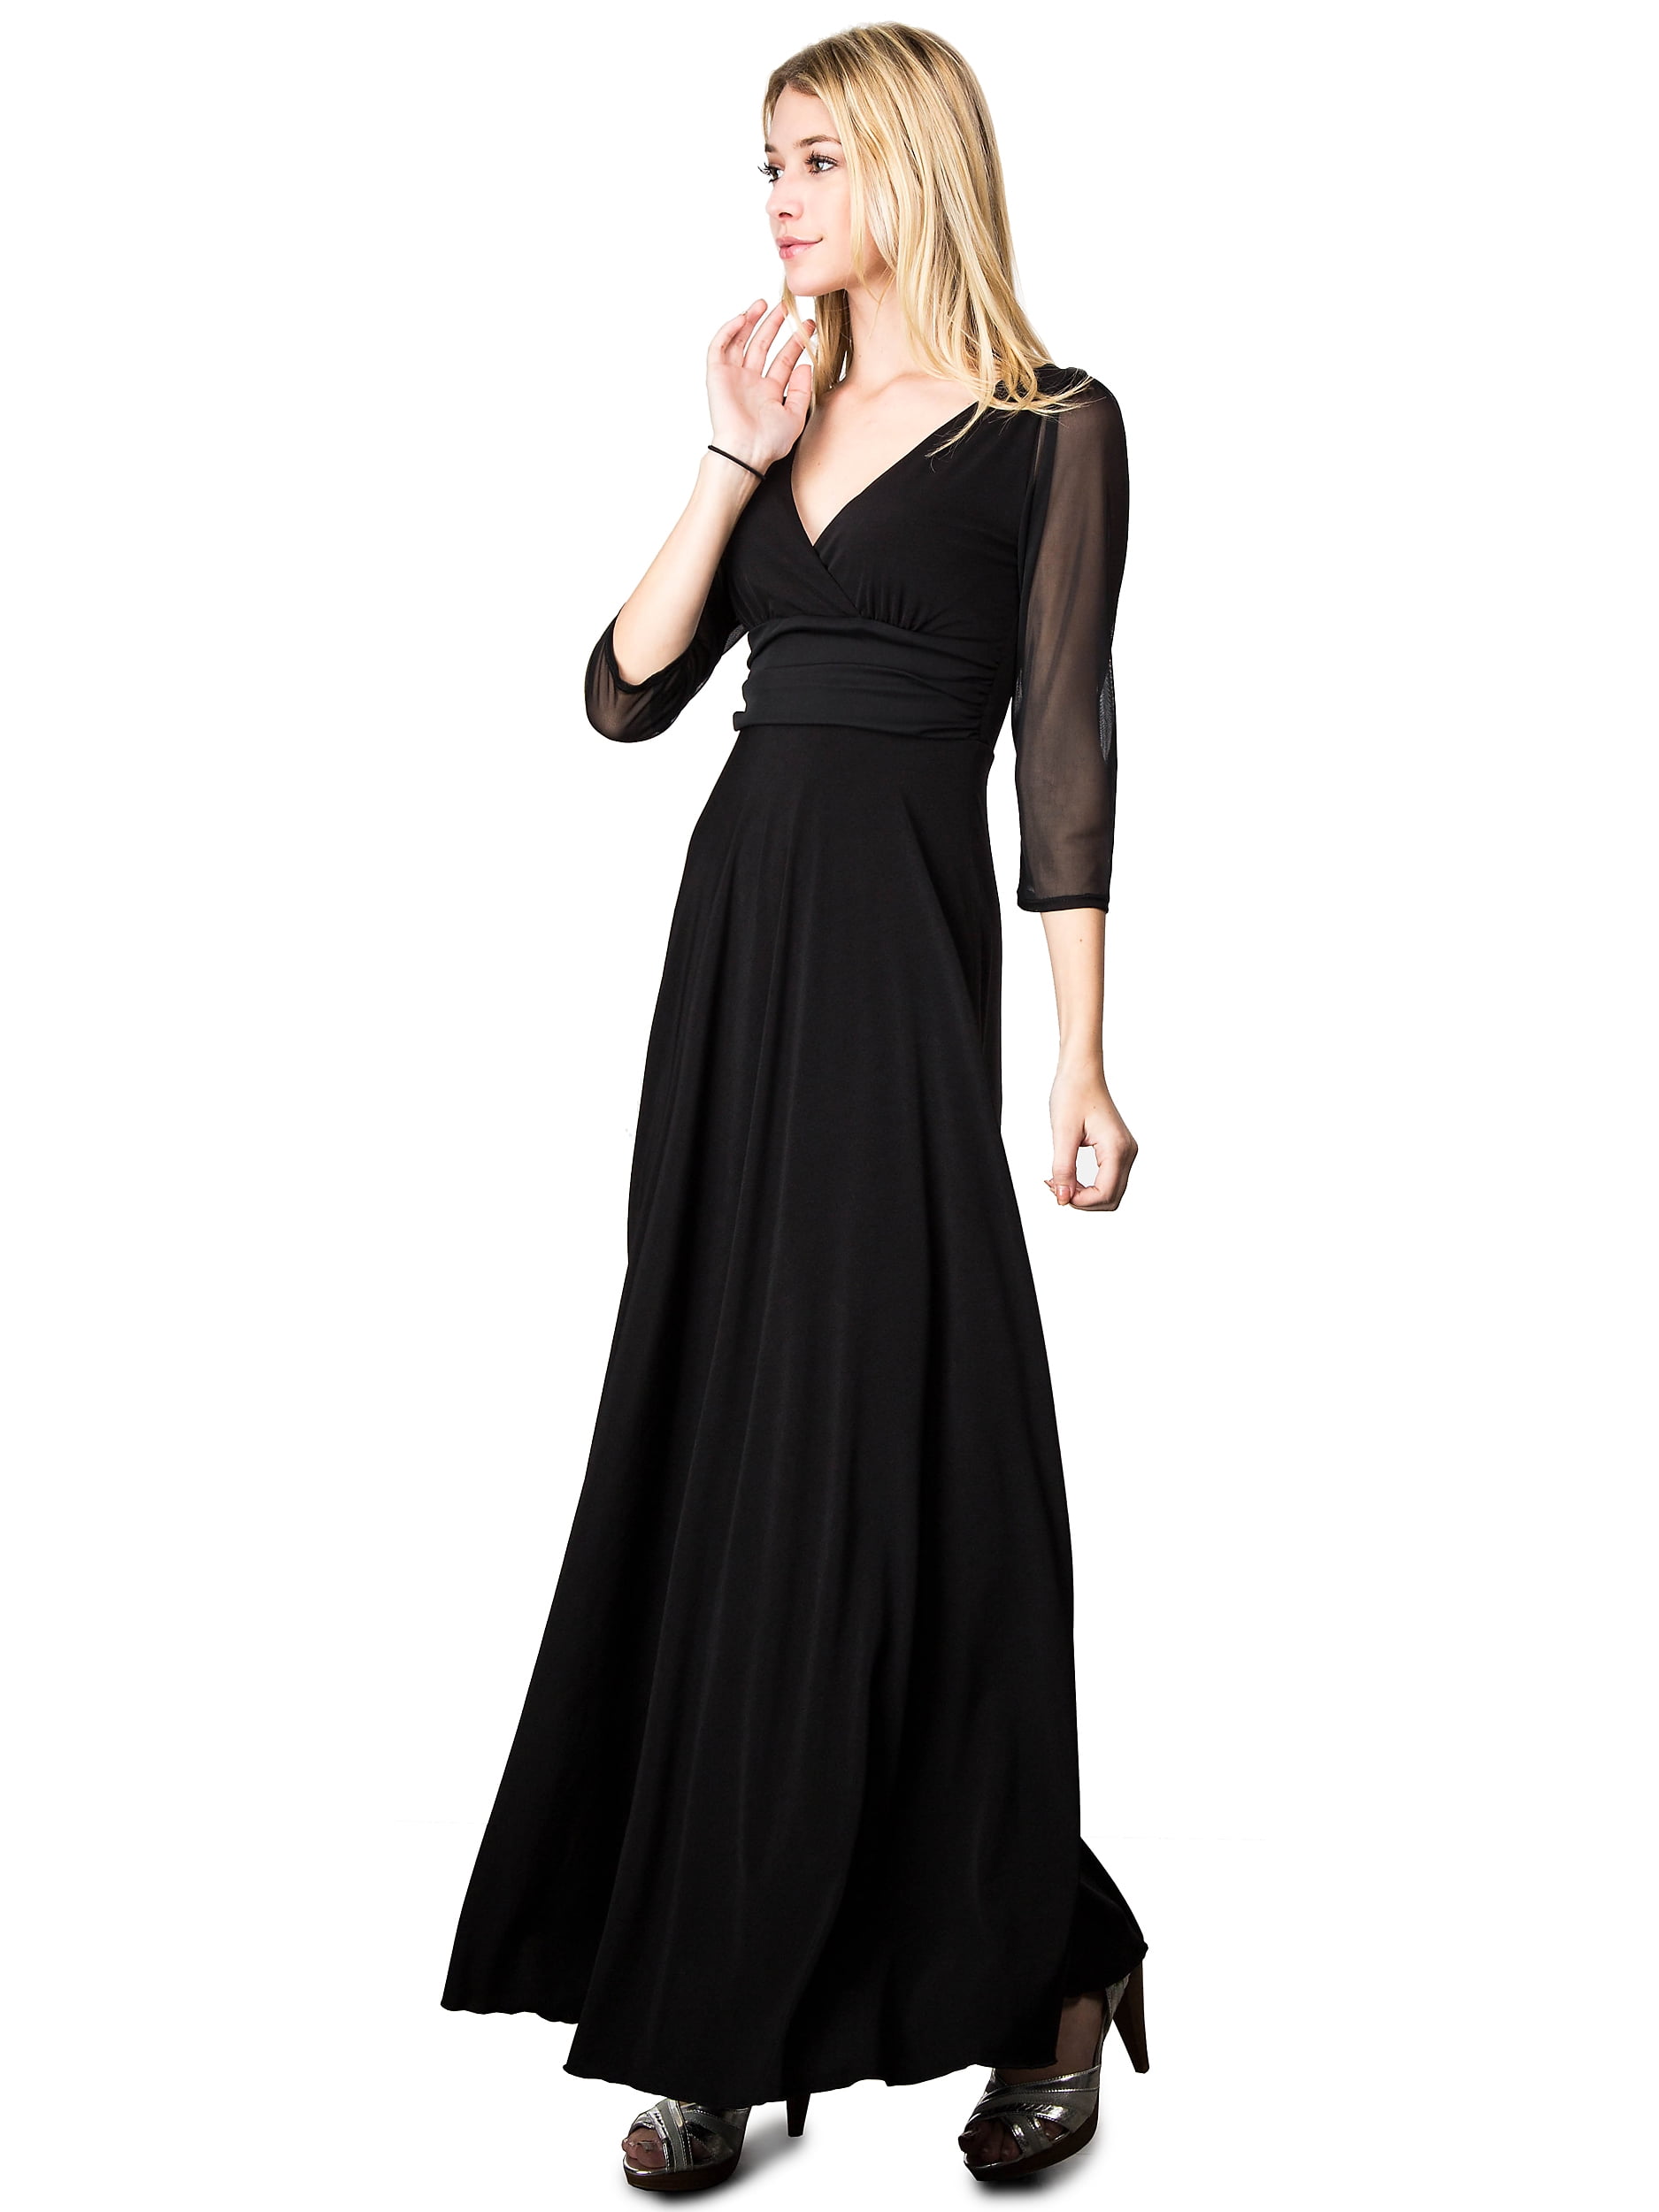 Evanese Women's Slip on Evening Party Formal Long Dress Gown with 3/4